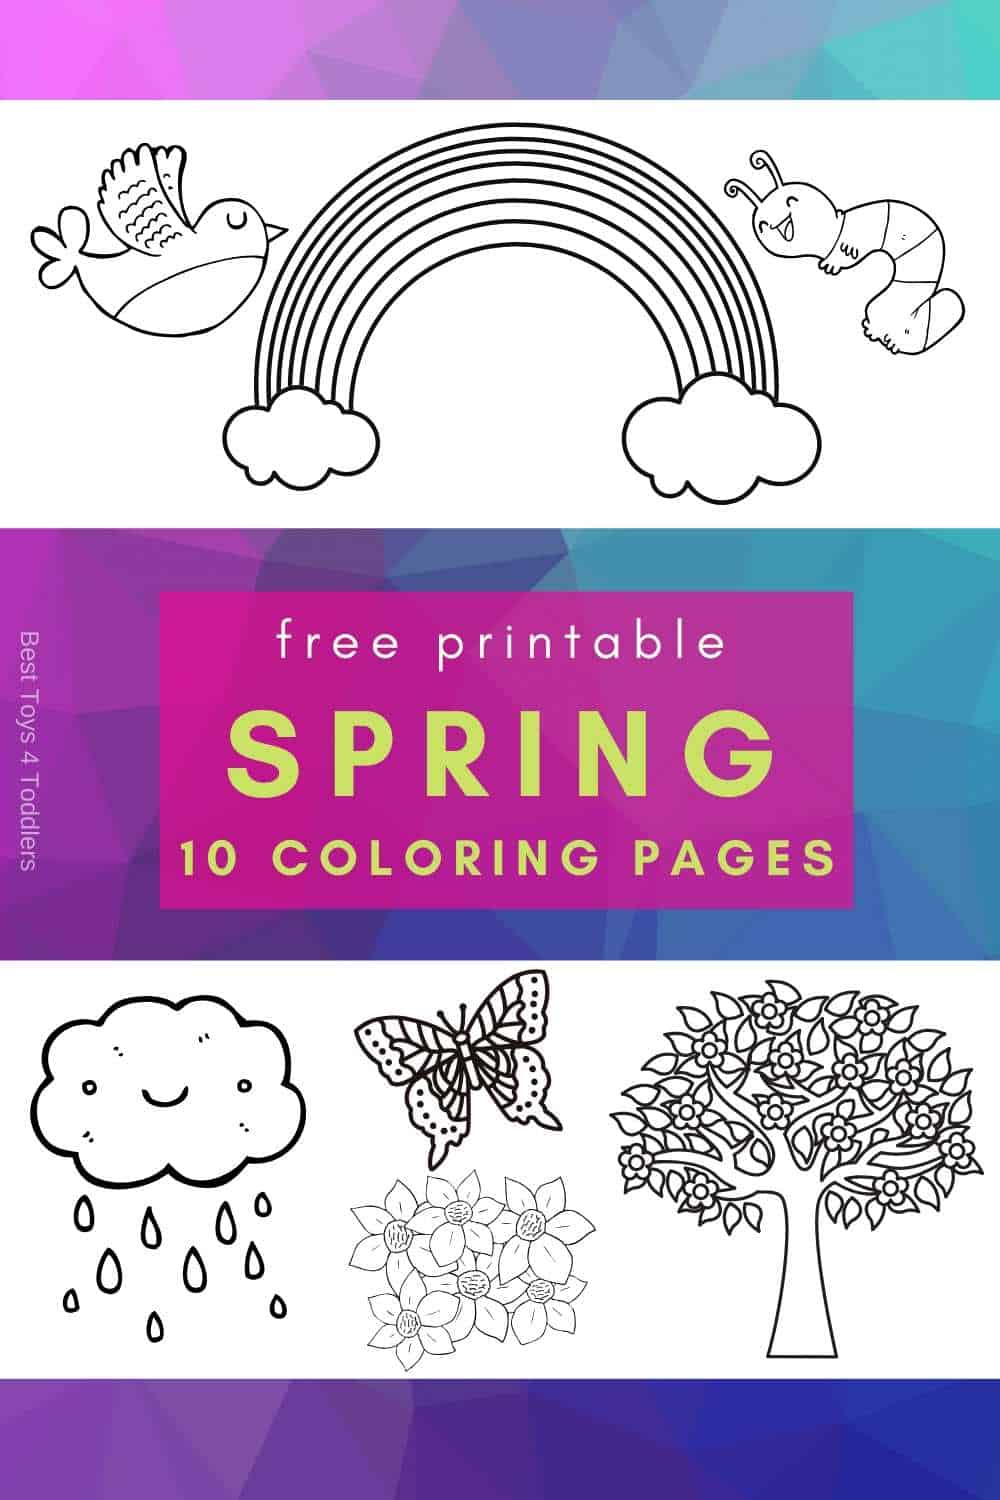 Free spring coloring pages for toddlers and preschoolers